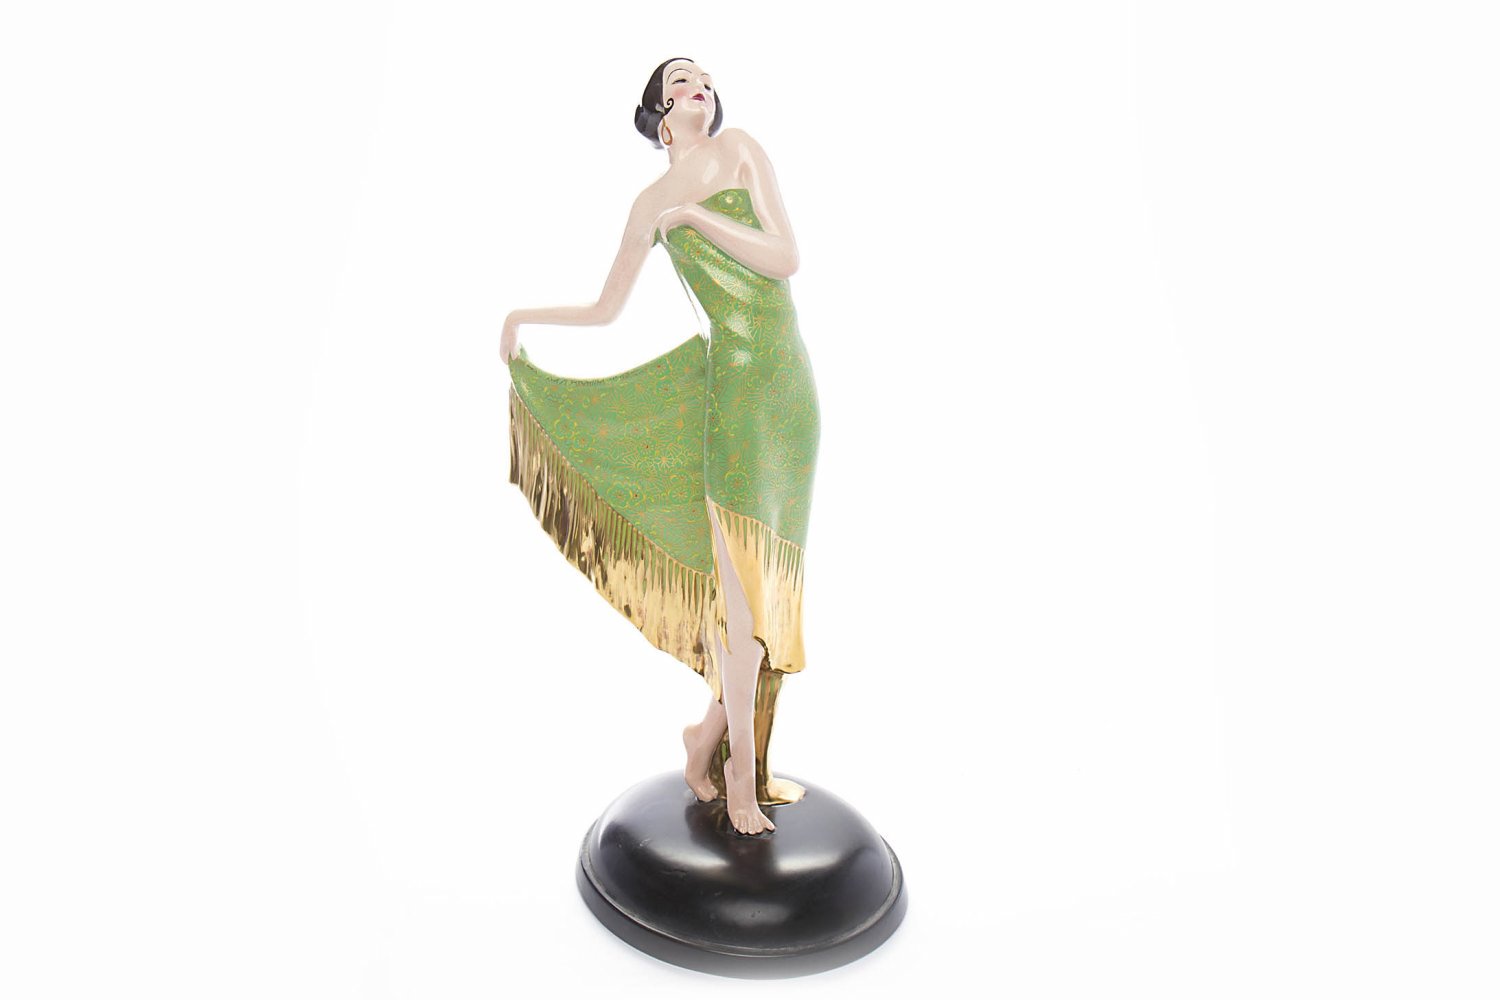 FIELDINGS CROWN DEVON ART DECO FIGURE OF A DANCER the young lady with bobbed hair and gypsy - Image 3 of 4